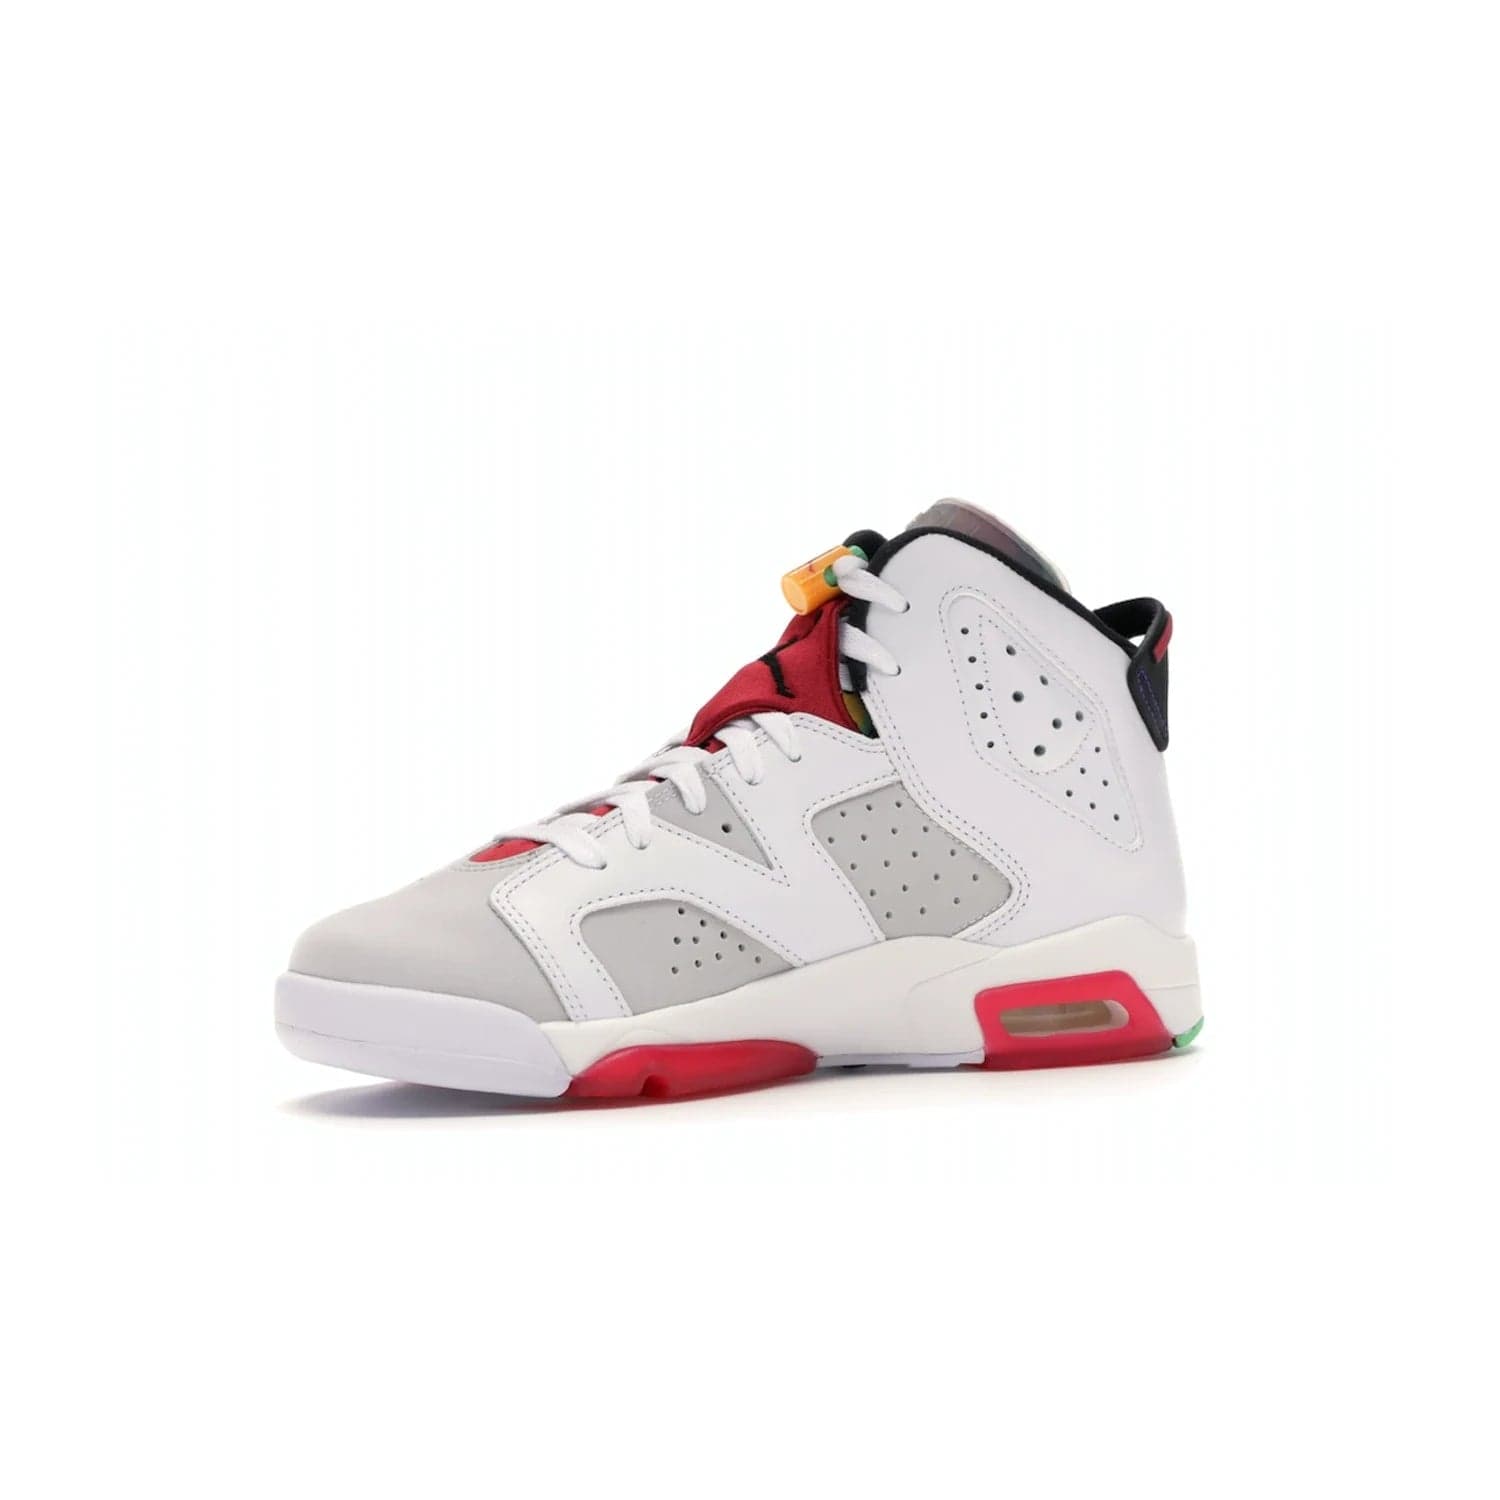 Jordan 6 Retro Hare (GS) - Image 16 - Only at www.BallersClubKickz.com - The Air Jordan 6 Hare GS. Comfortable suede upper, perforations, red pods, two-tone midsole, and signature "Jumpman" emblem. Released 17 June 2020. Perfect for any sneakerhead.